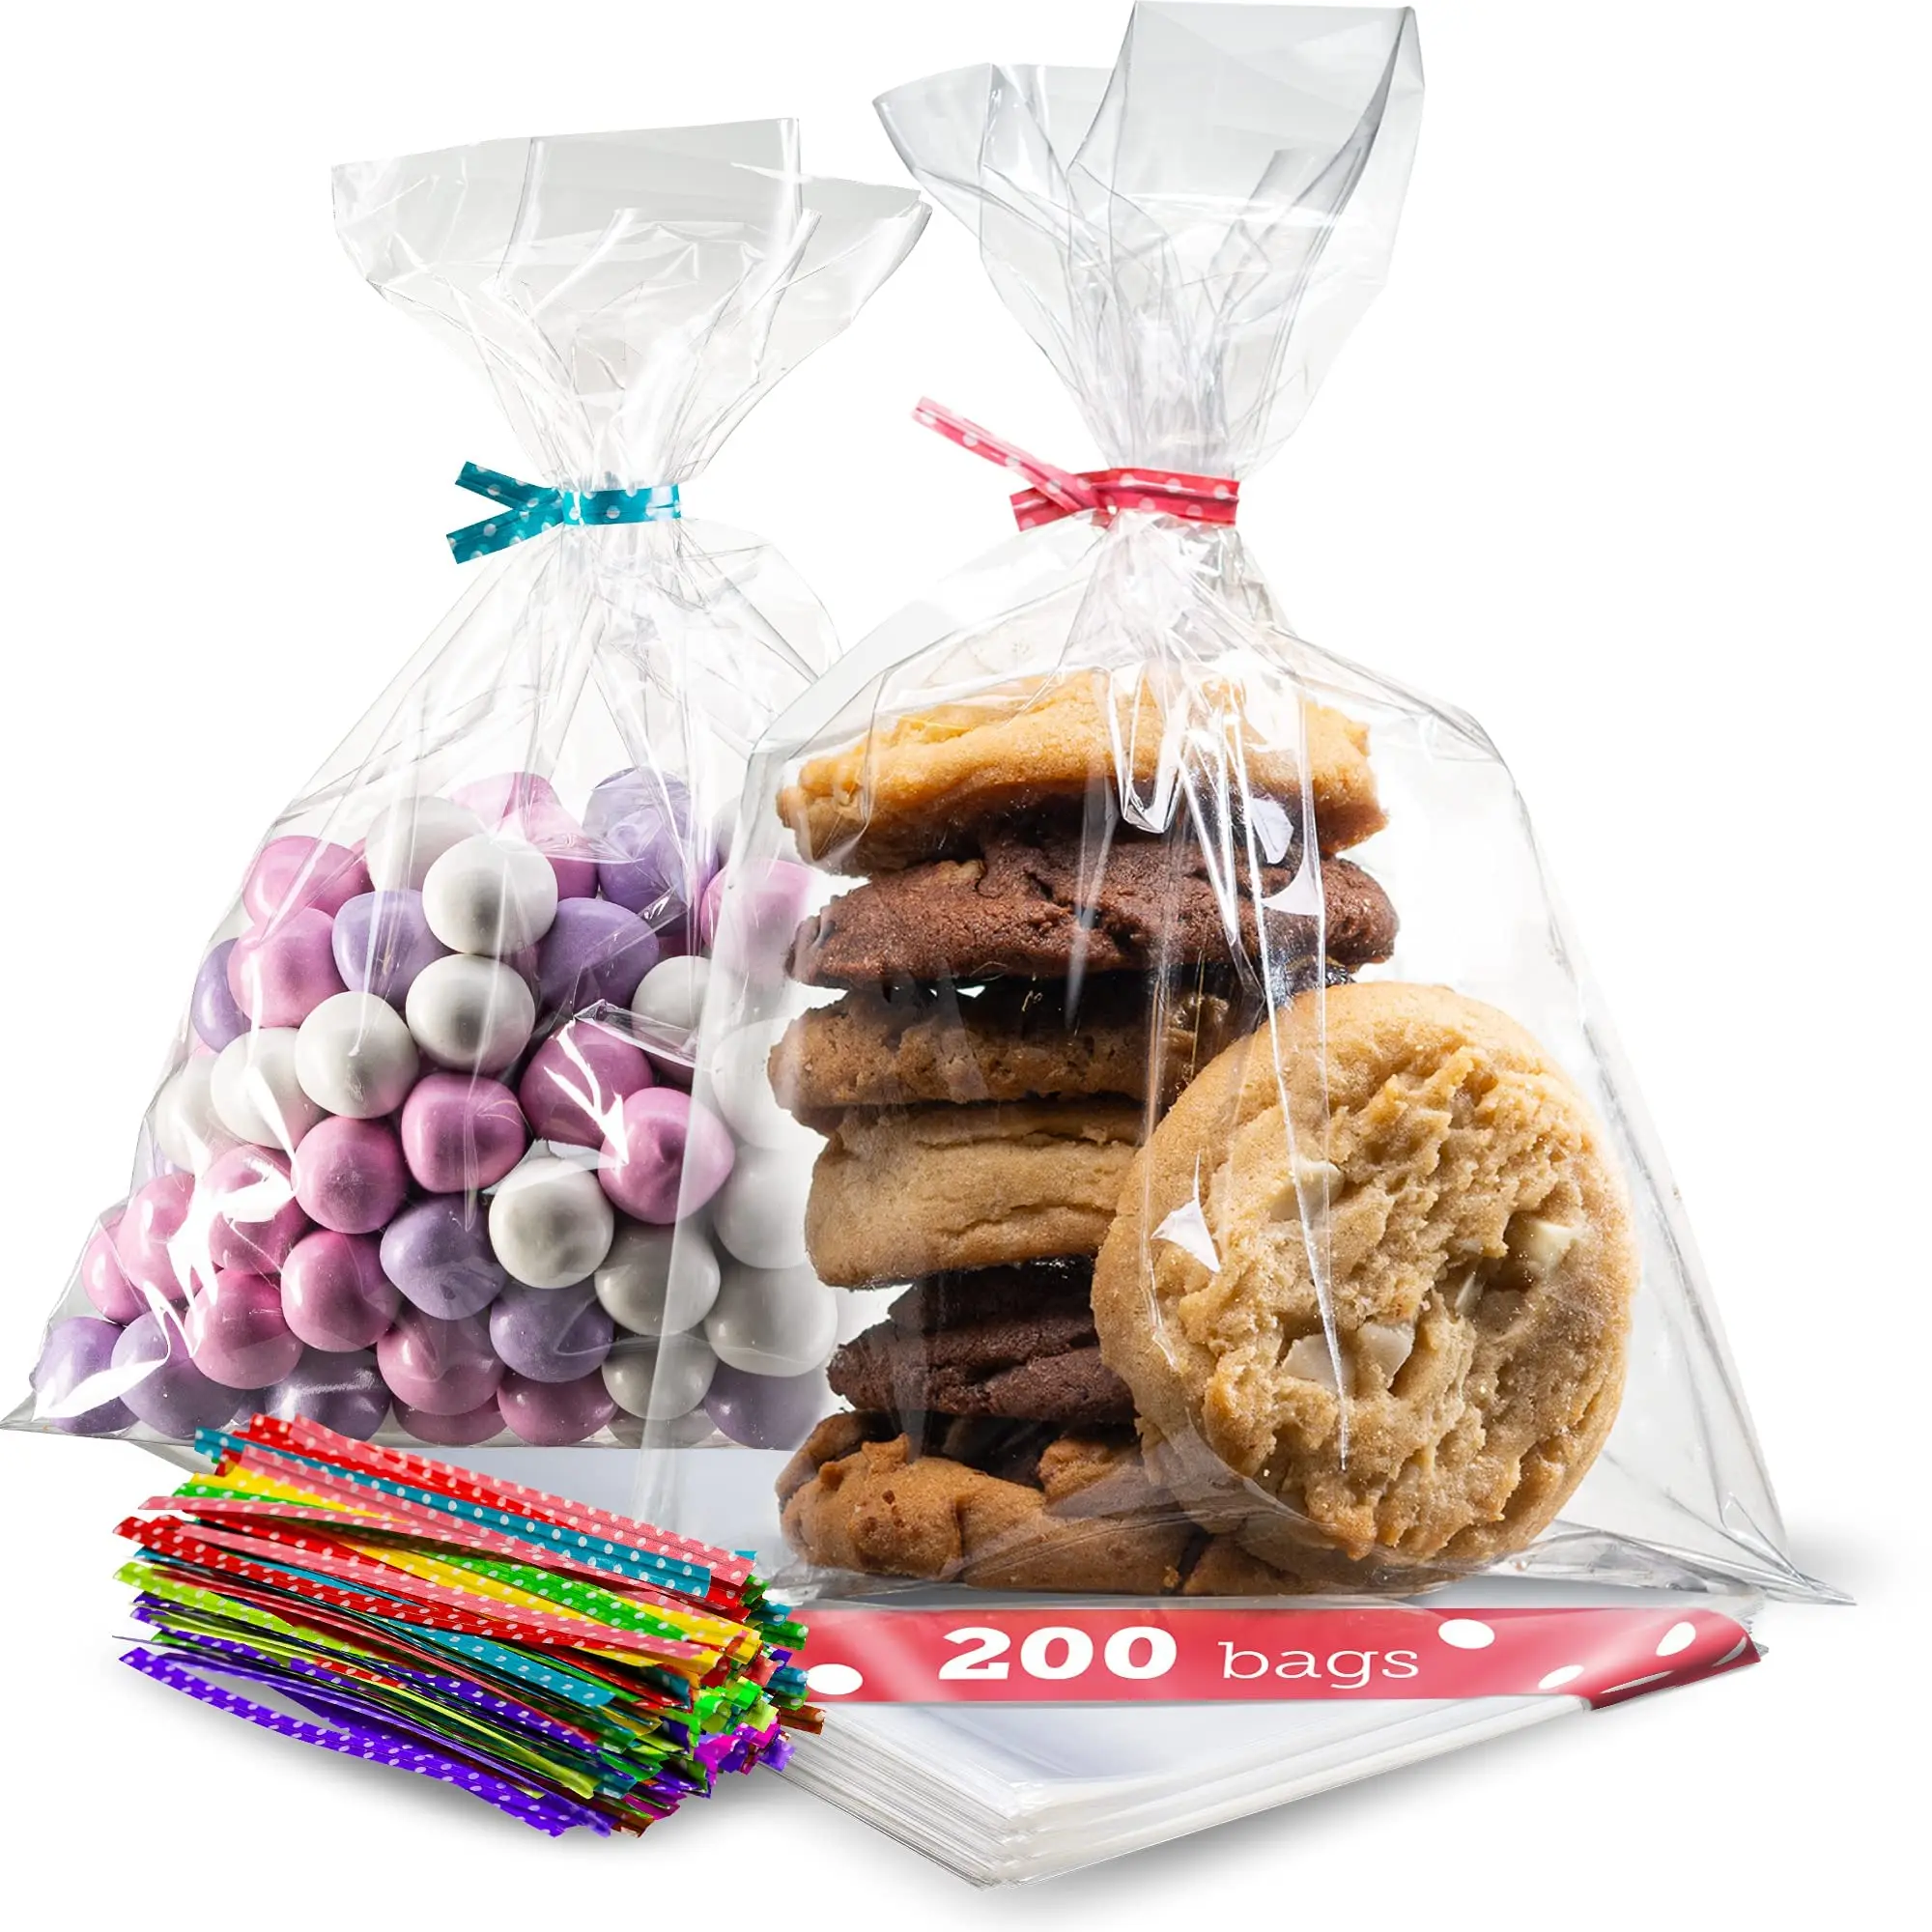 Dropship Clear Treat Bags 8 X 10; Pack Of 1000 Plastic Clear Gift Bags  For Candy;